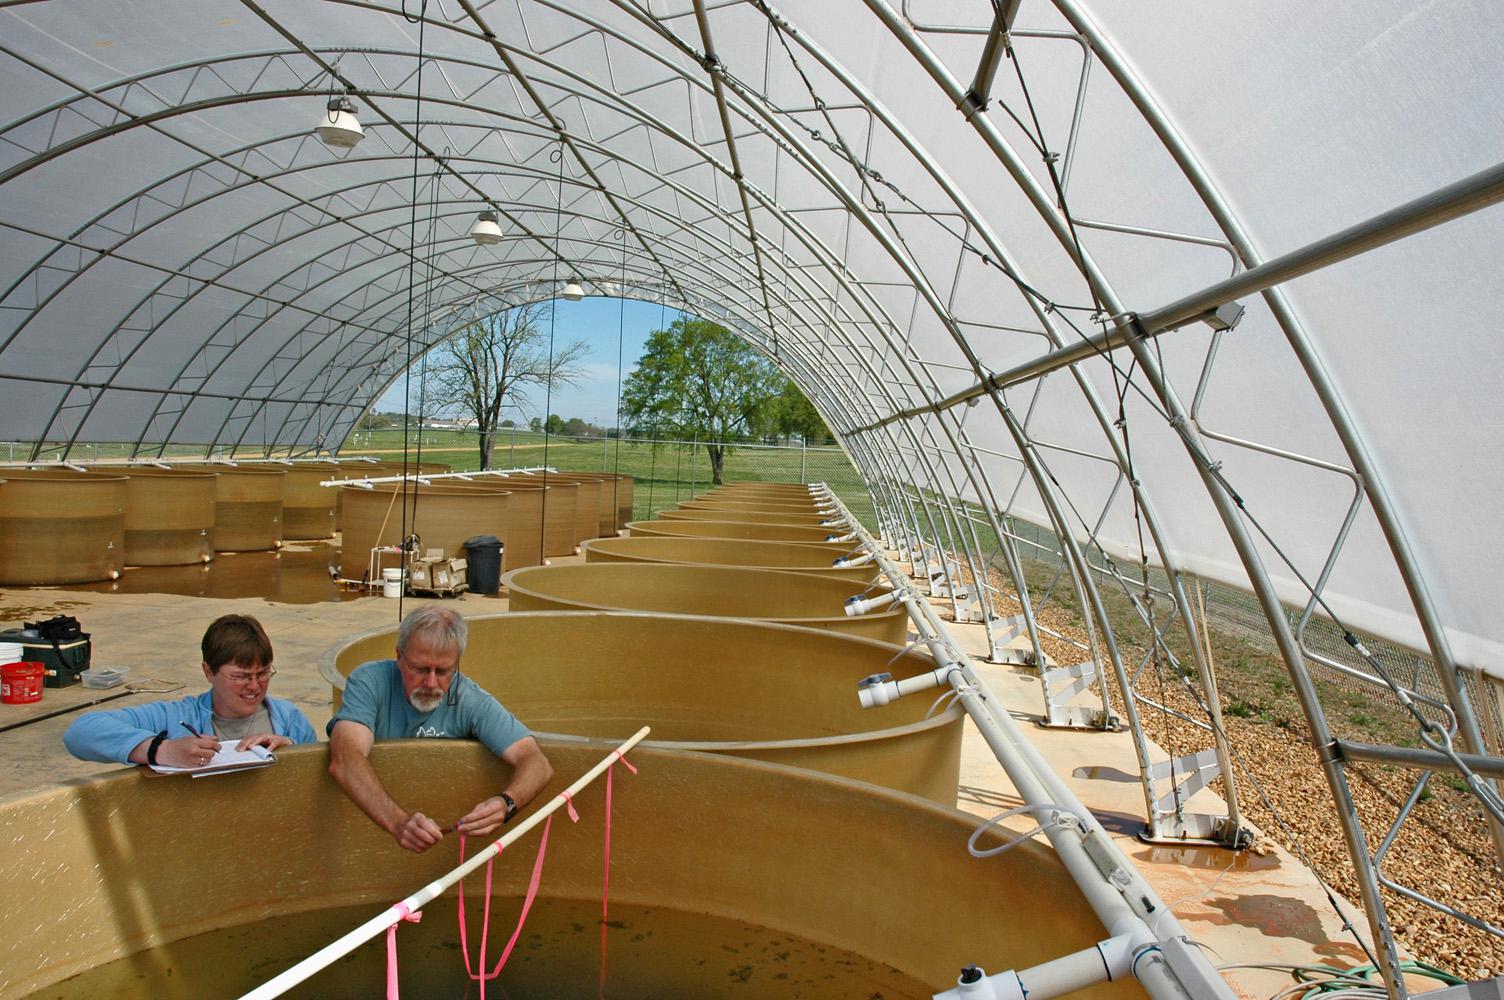 MSU doctoral student Erica Schlickeisen, left, and her major professor, aquatic ecologist Eric Dibble, prepare to sample plants in one of the tanks at the mesocosm on MSU's South Farm. (Photo by MSU Department of Wildlife and Fisheries/Sandor Dibble)